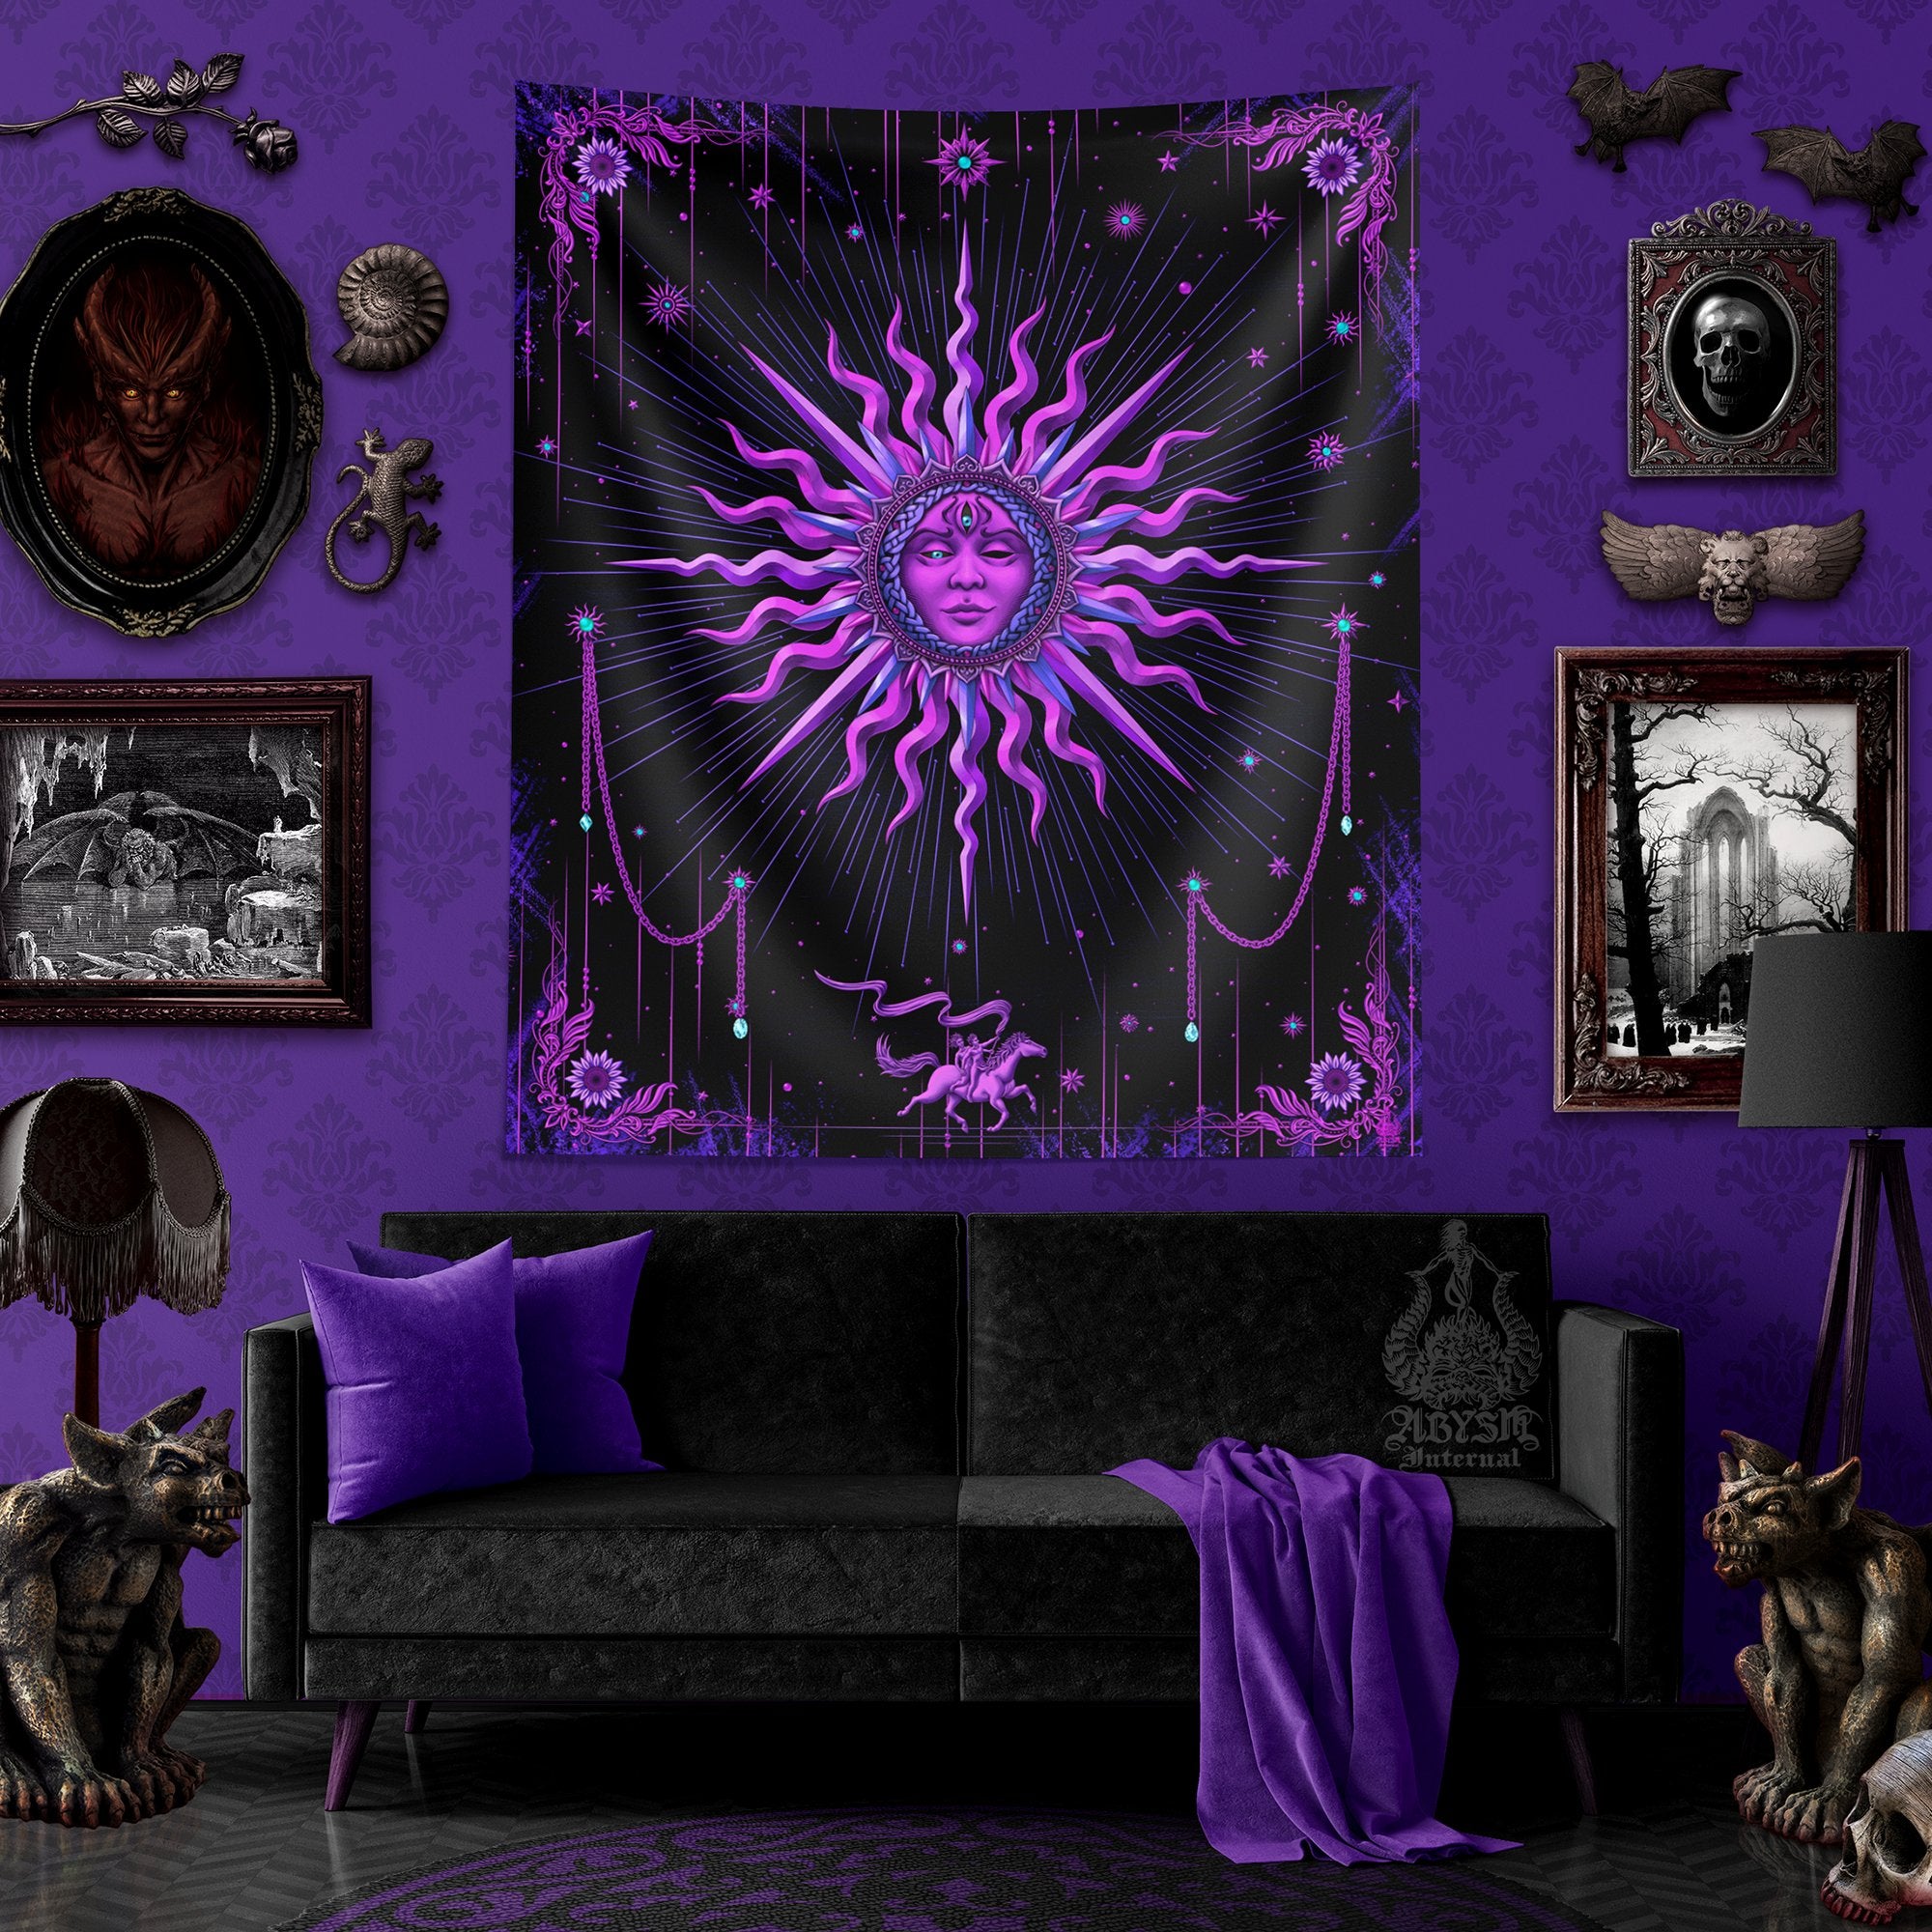 Whimsical Sun Tapestry, Gothic Tarot Card Arcana Wall Hanging, Pastel Goth Witch's Room Decor, Witchy Home, Magic and Esoteric Art, Vertical Print - Purple Black - Abysm Internal